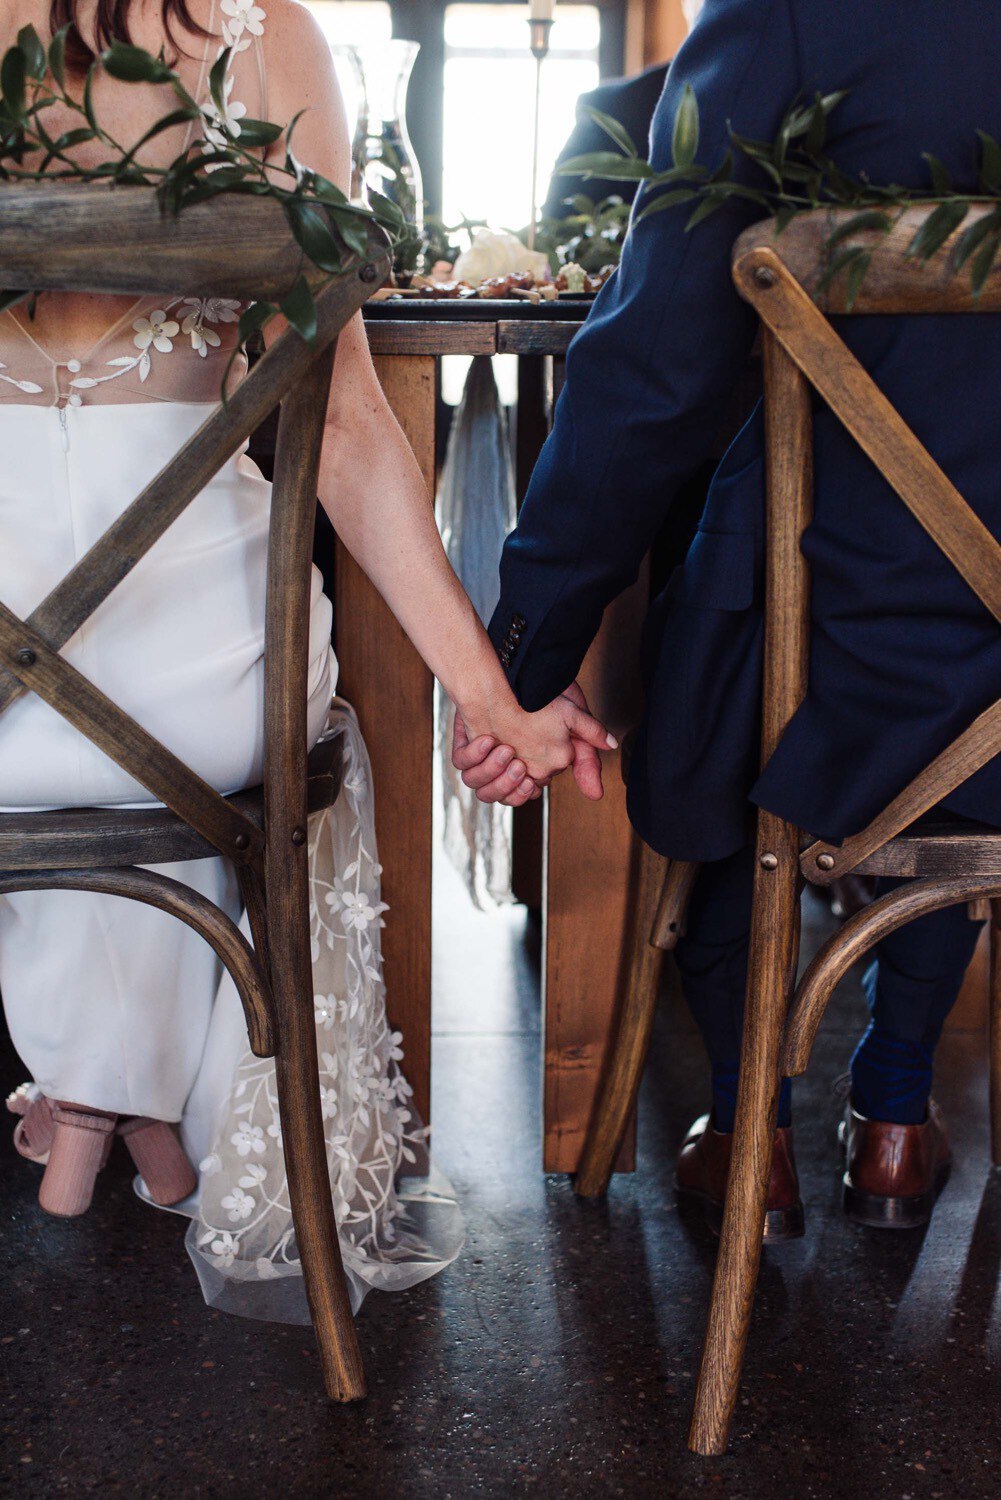 Bride and Groom hold hands surreptitiously at wedding reception